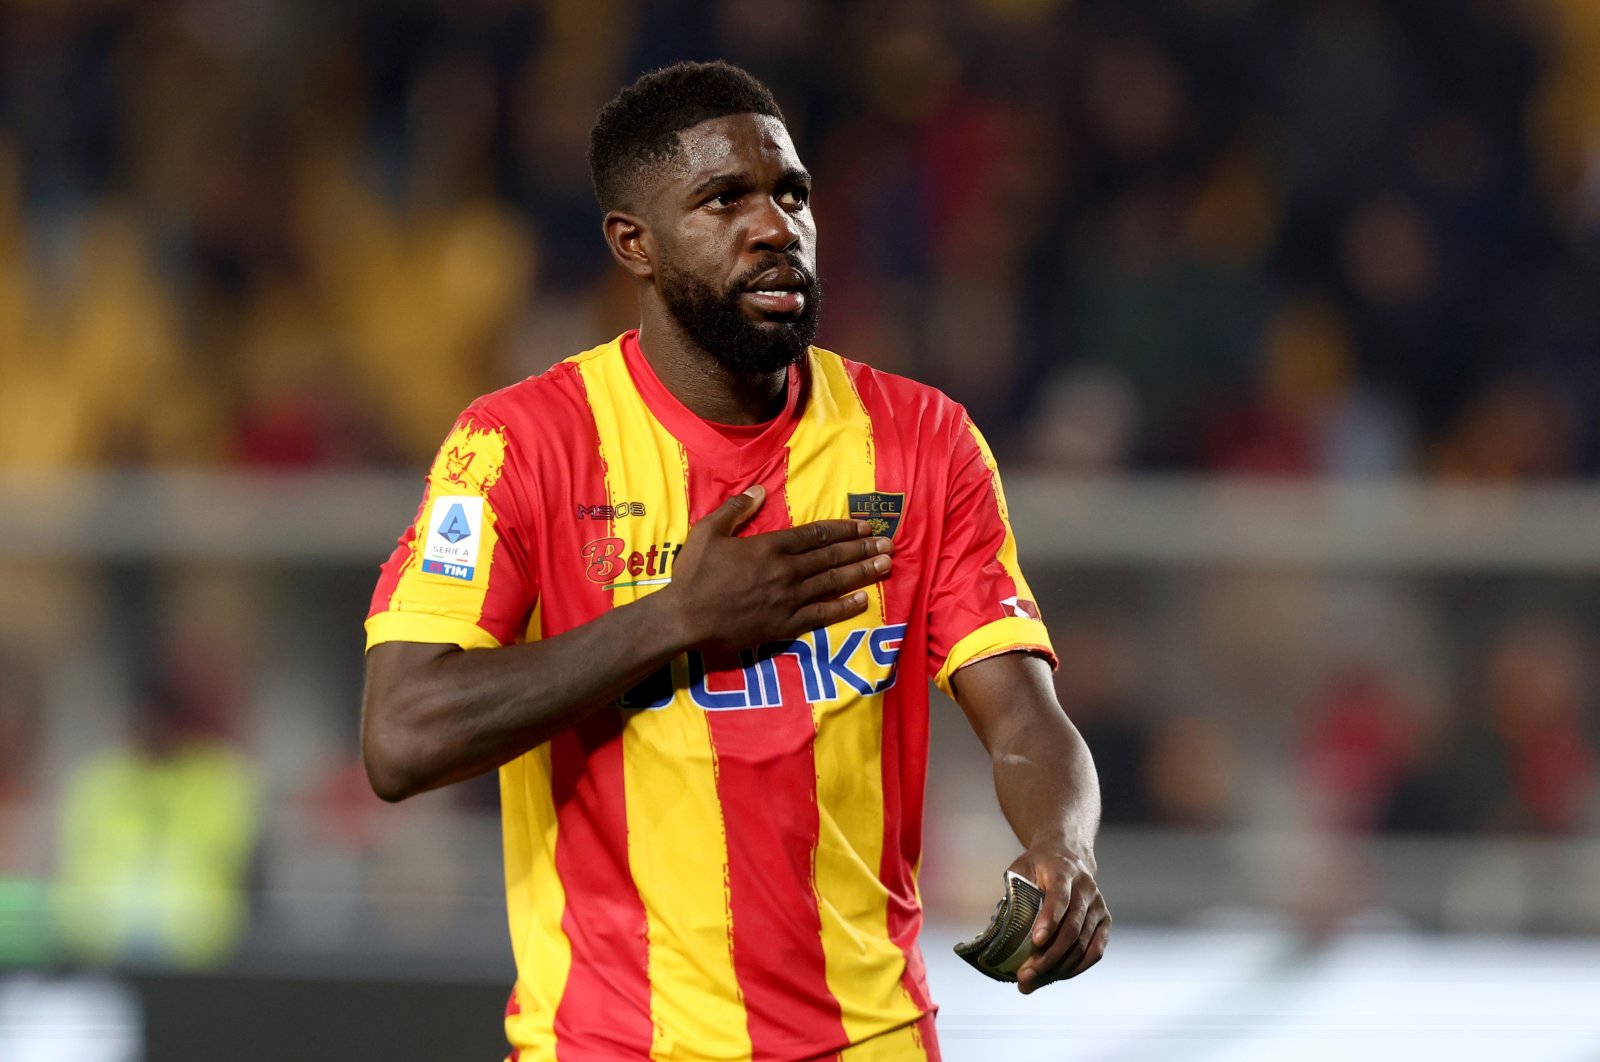 Samuel Umtiti of Lecce celebrates after the Serie A match between US Lecce and SS Lazio at Stadio Via del Mare, Lecce, Italy, Jan. 4, 2023. (Getty Images Photo)